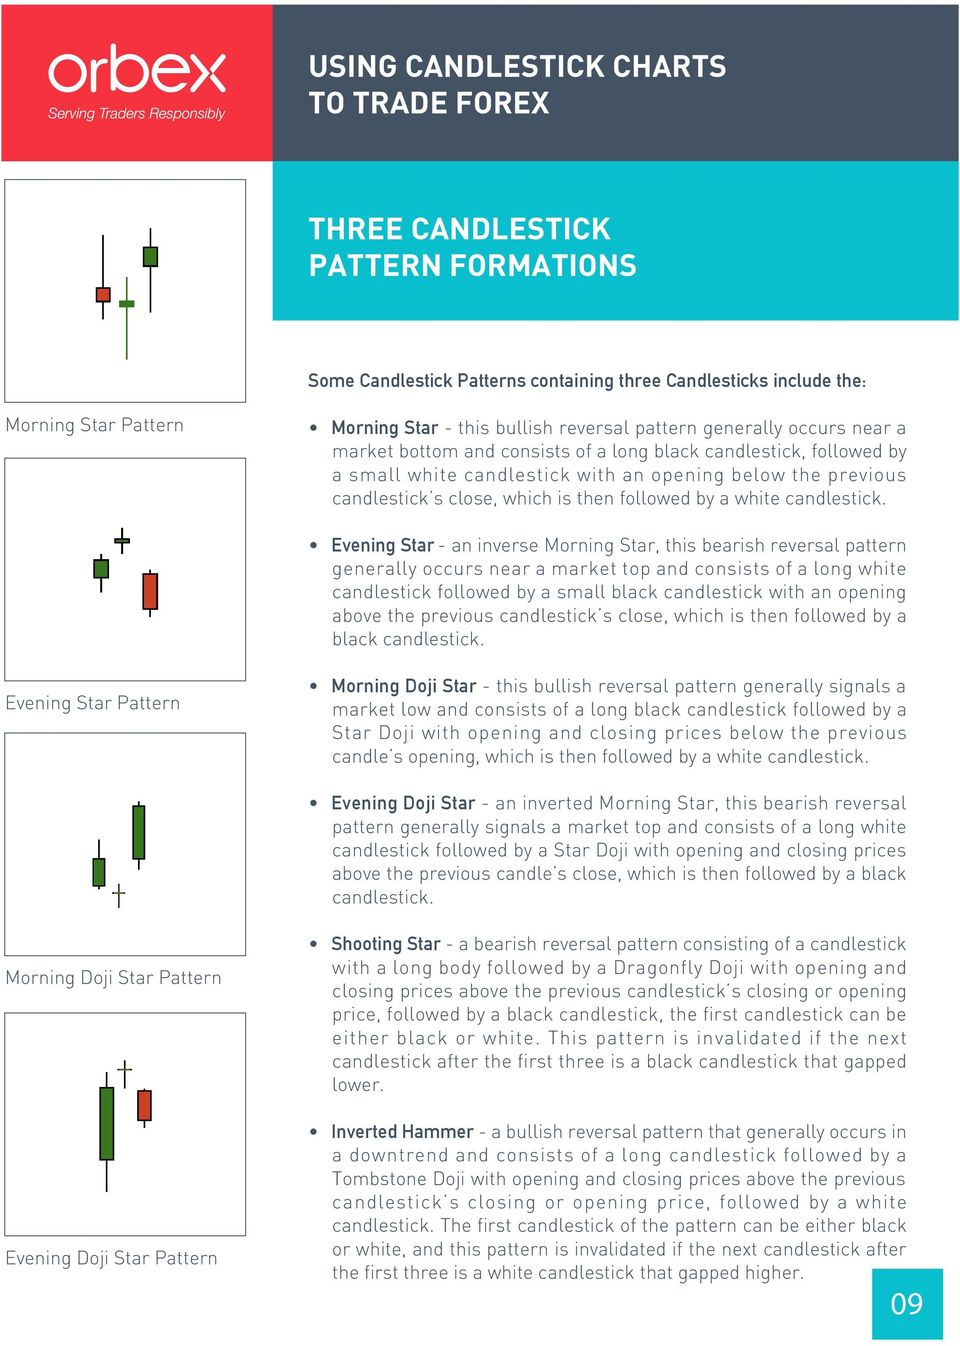 Evening Star - an inverse Morning Star, this bearish reversal pattern generally occurs near a market top and consists of a long white candlestick followed by a small black candlestick with an opening